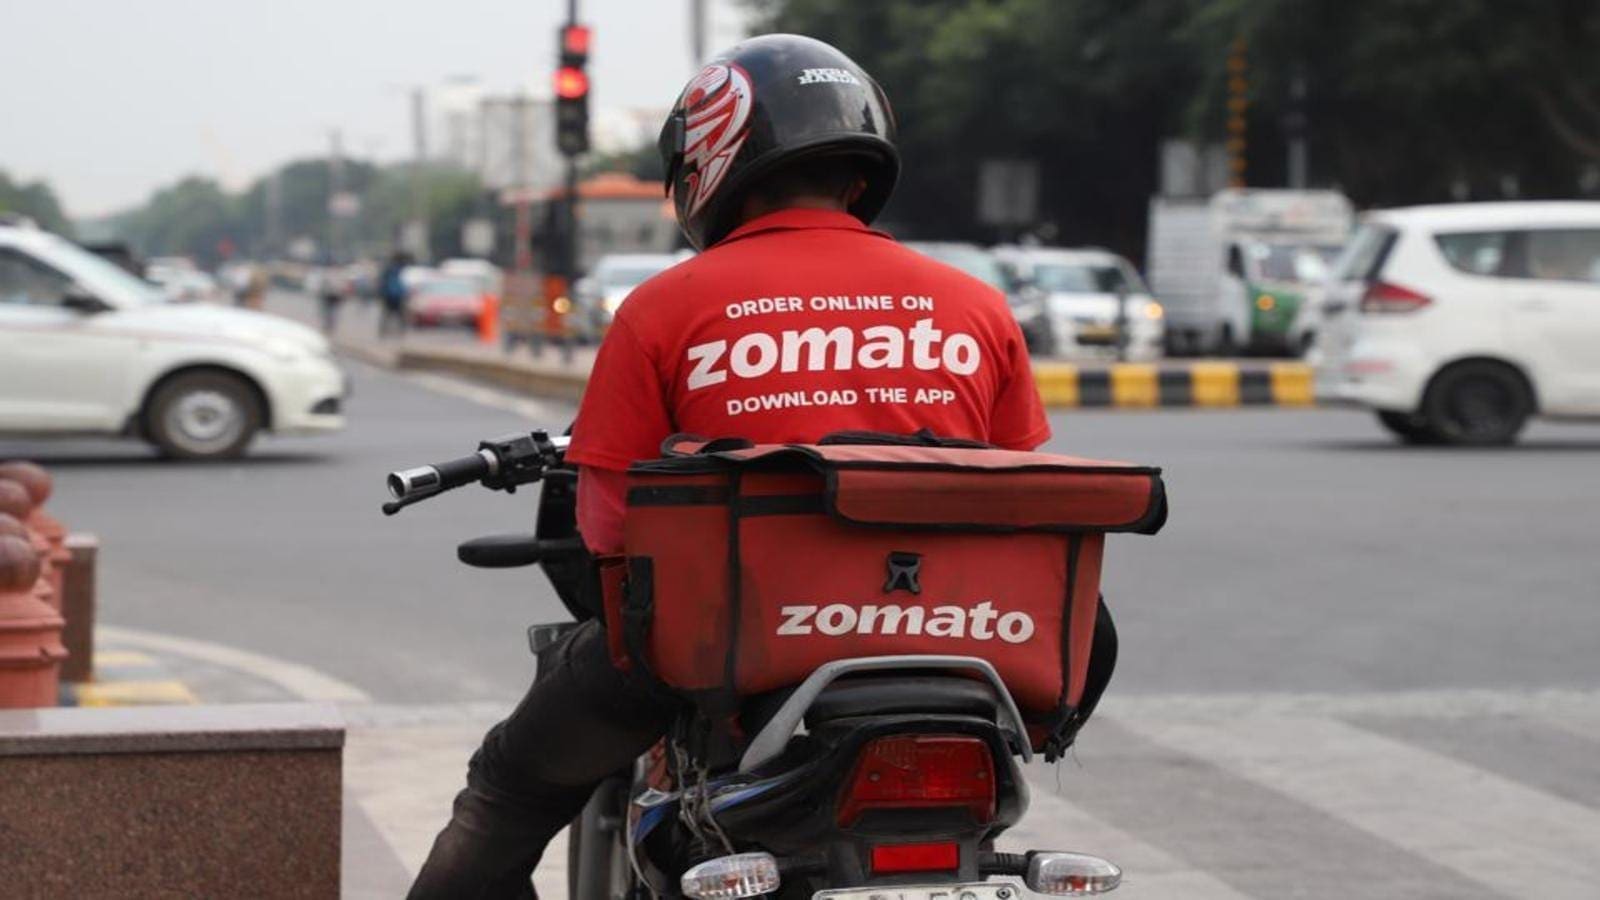 Zomato full year revenues rise 123% driven by higher transacting customer base